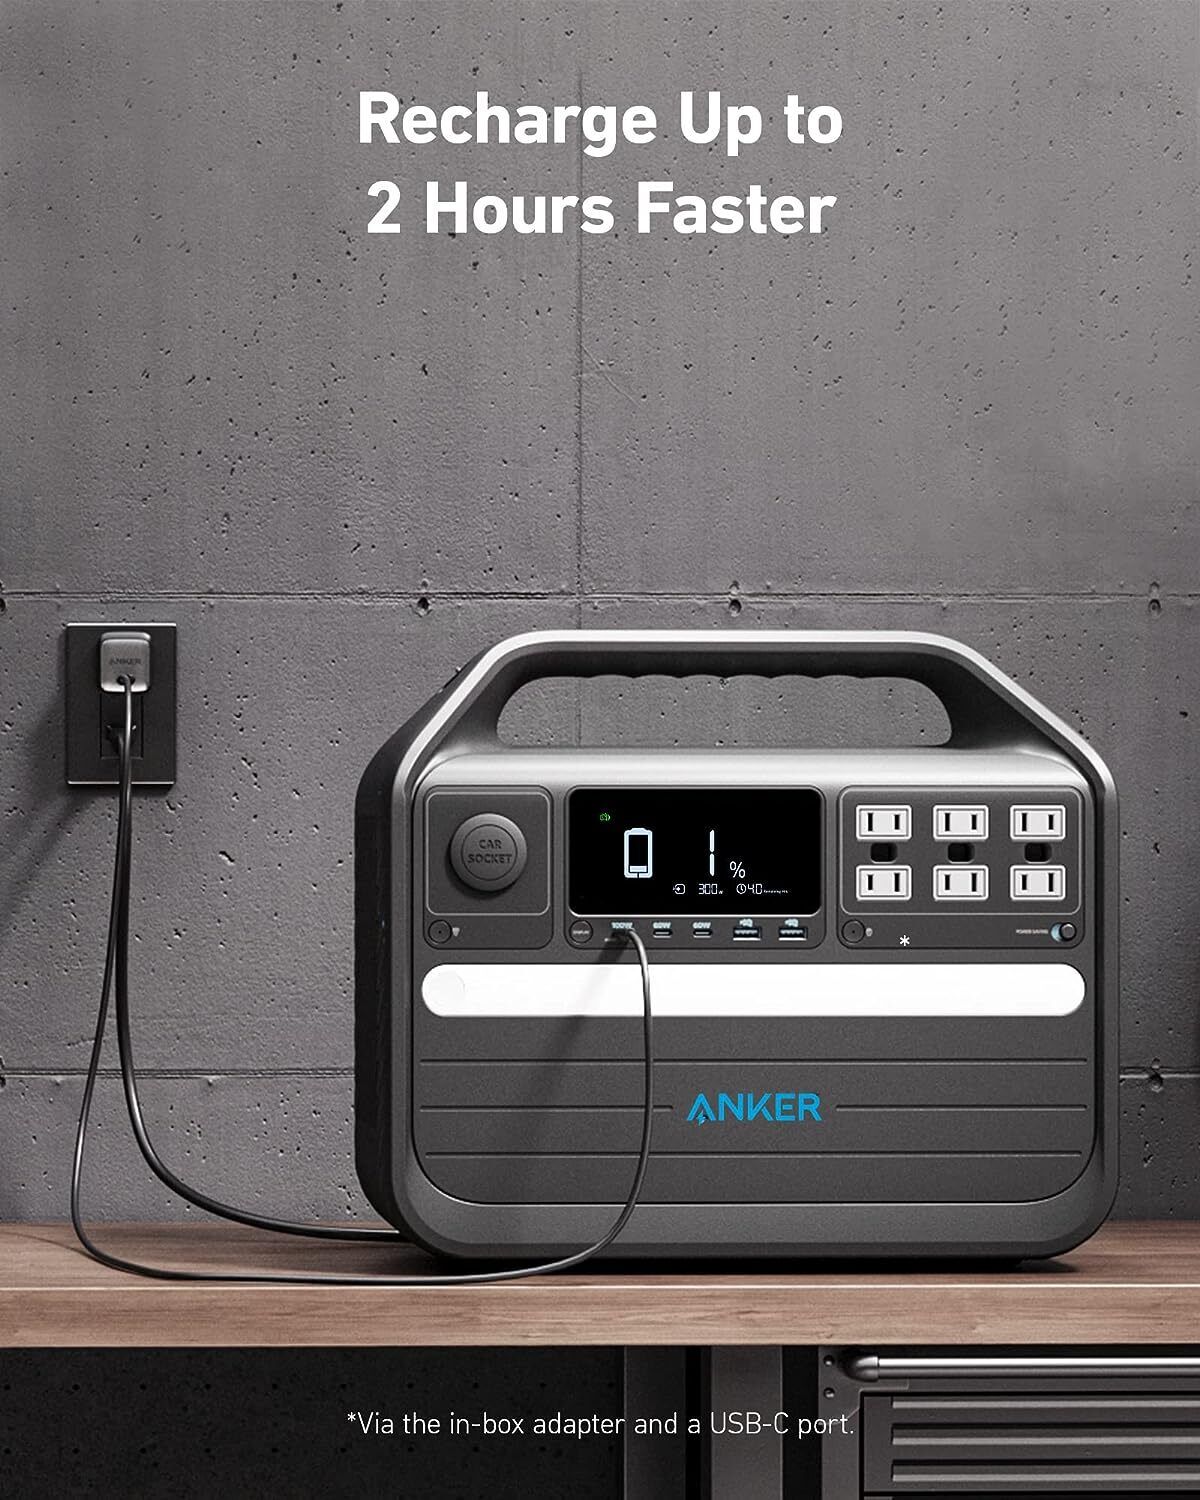 Anker Play Anker 555 Portable Power Station 1024Wh Solar Generator for Outdoor Emergency